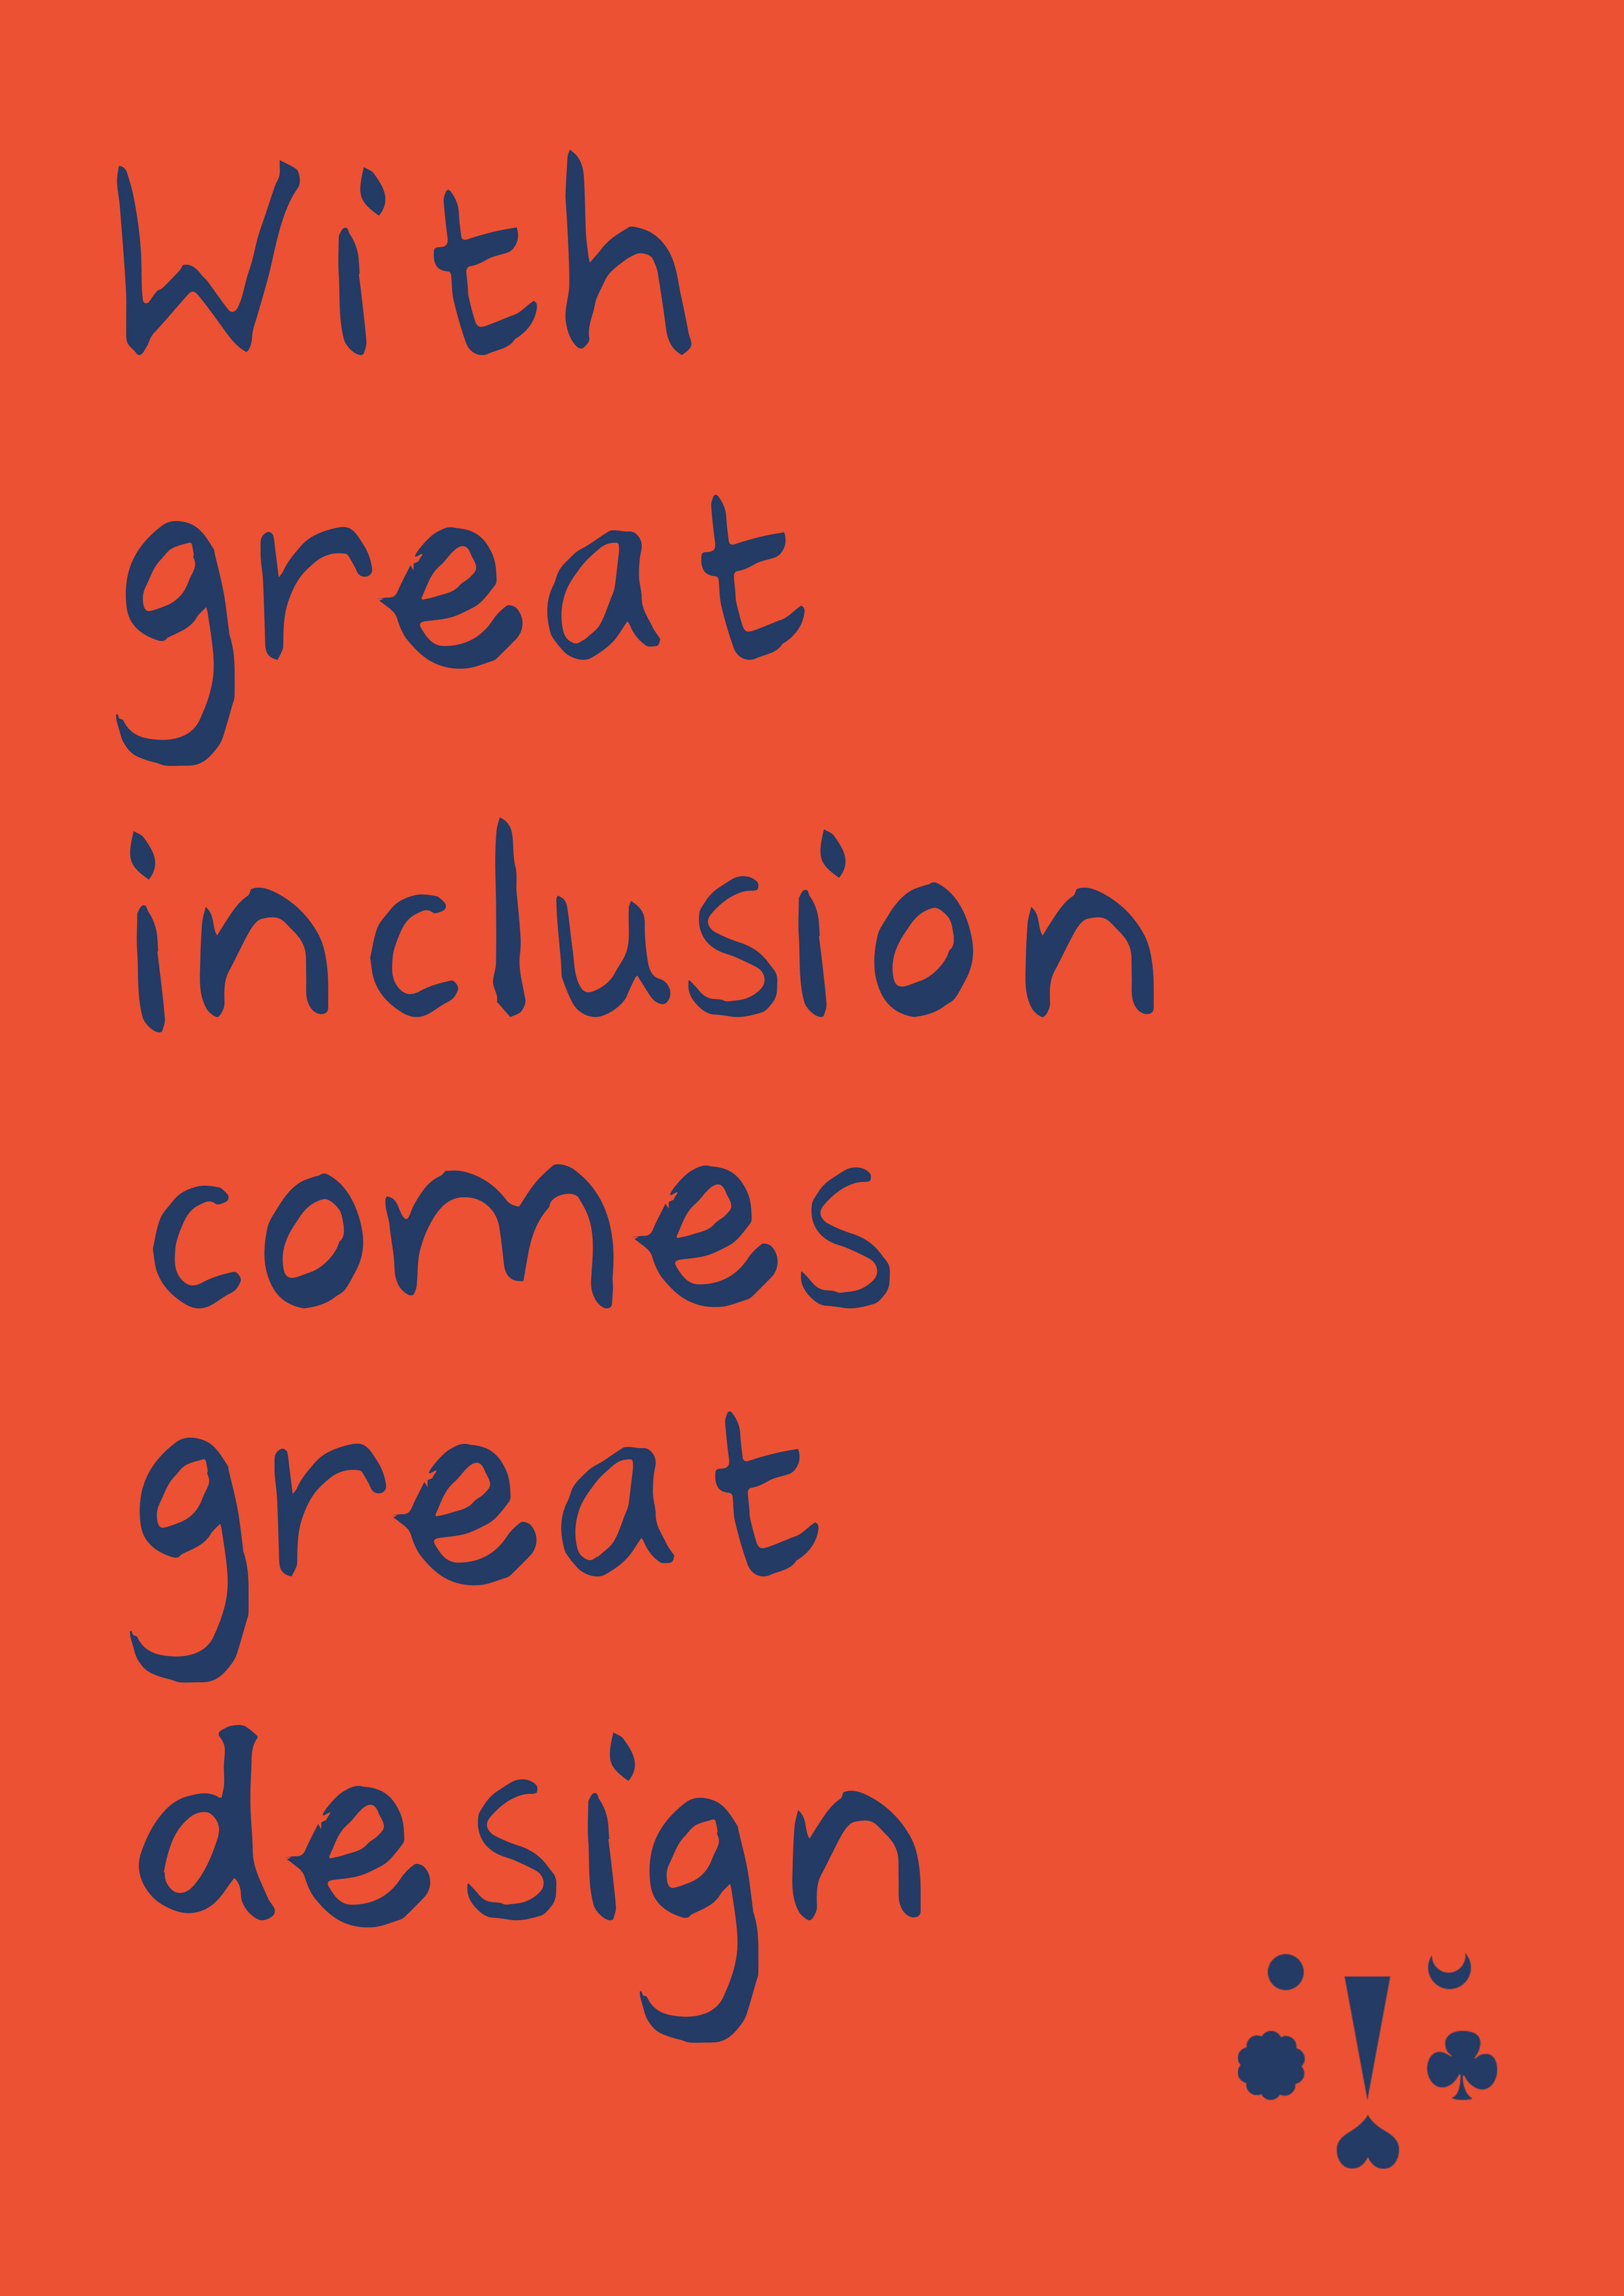 With great inclusive comes great design